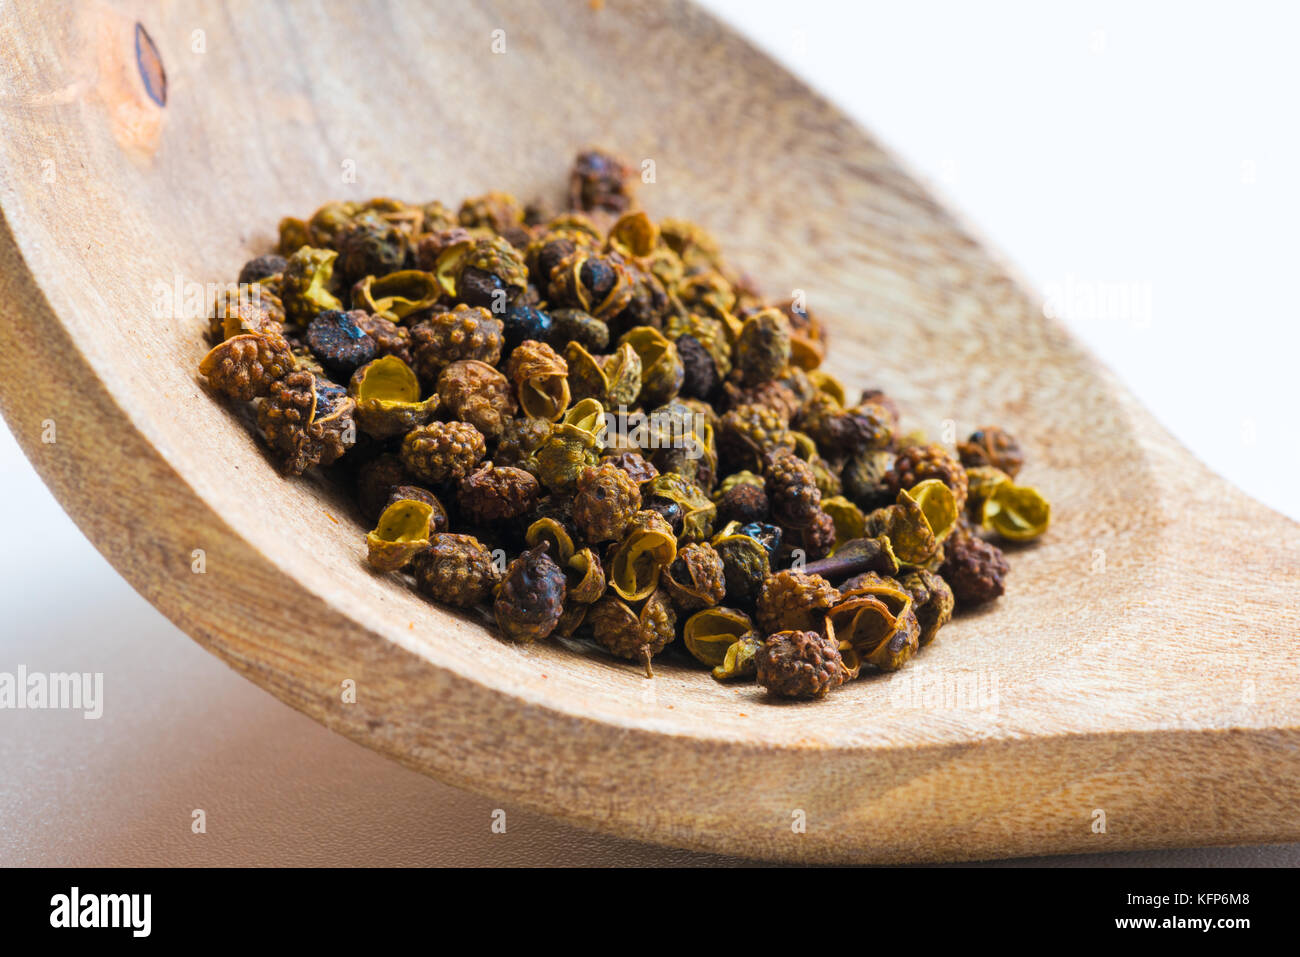 Sichuan green peppercorn close-up in a wood spoon Stock Photo